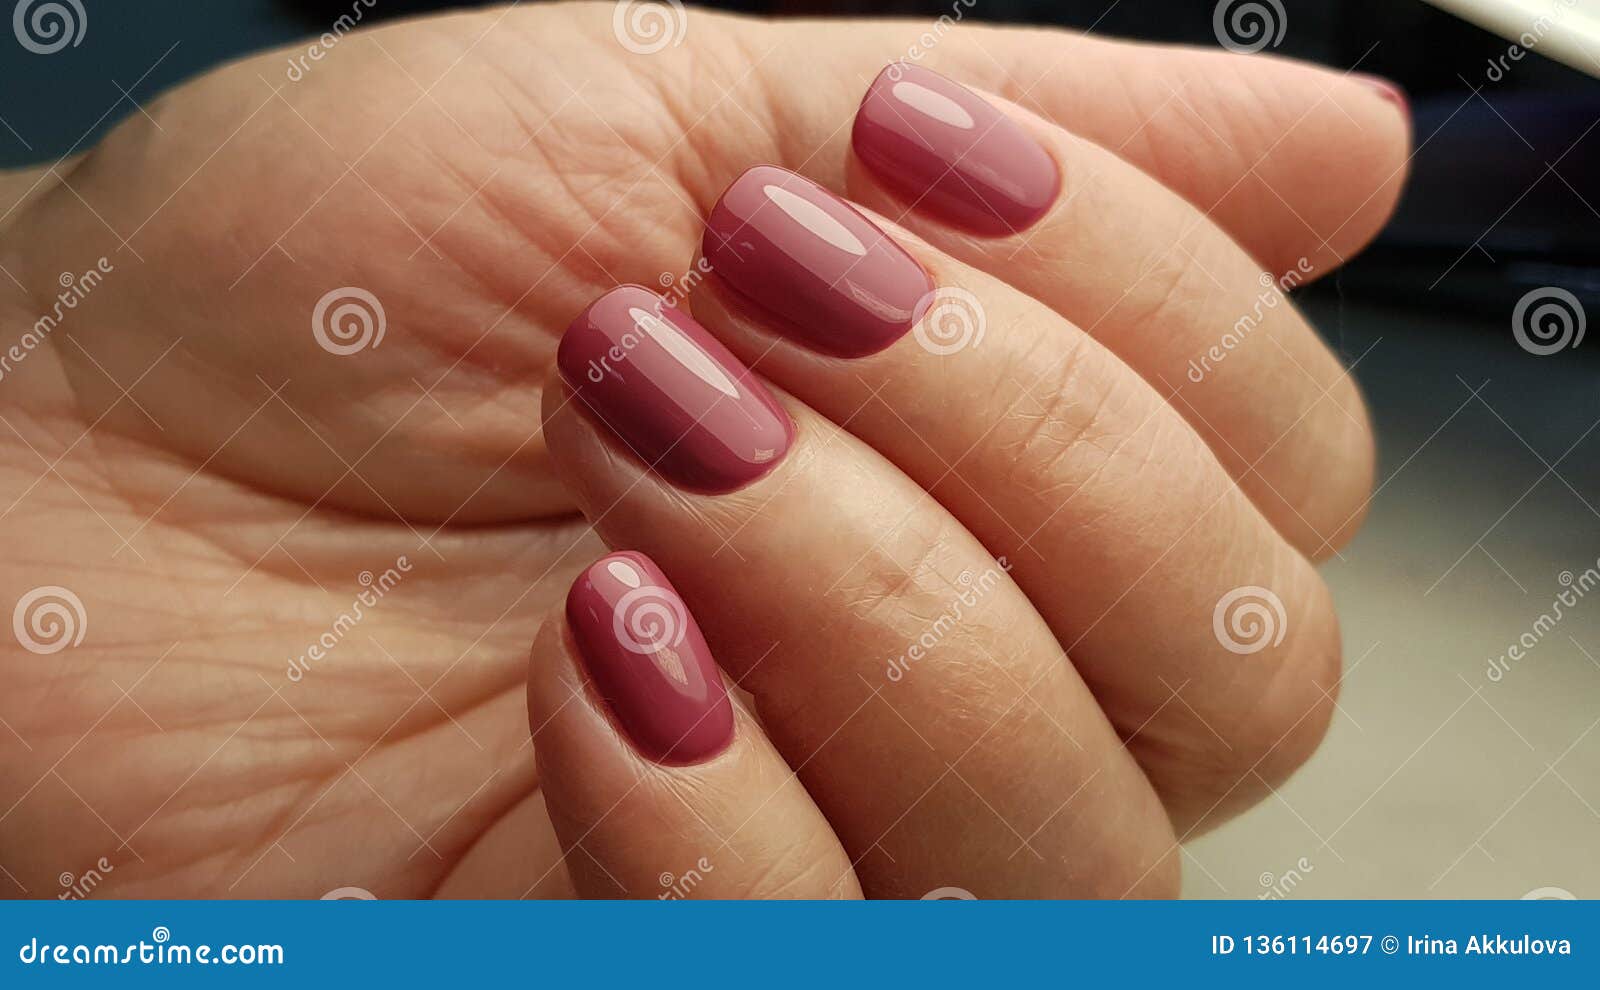 Nice Nails With Gel Polish Stock Image Image Of Oval 136114697